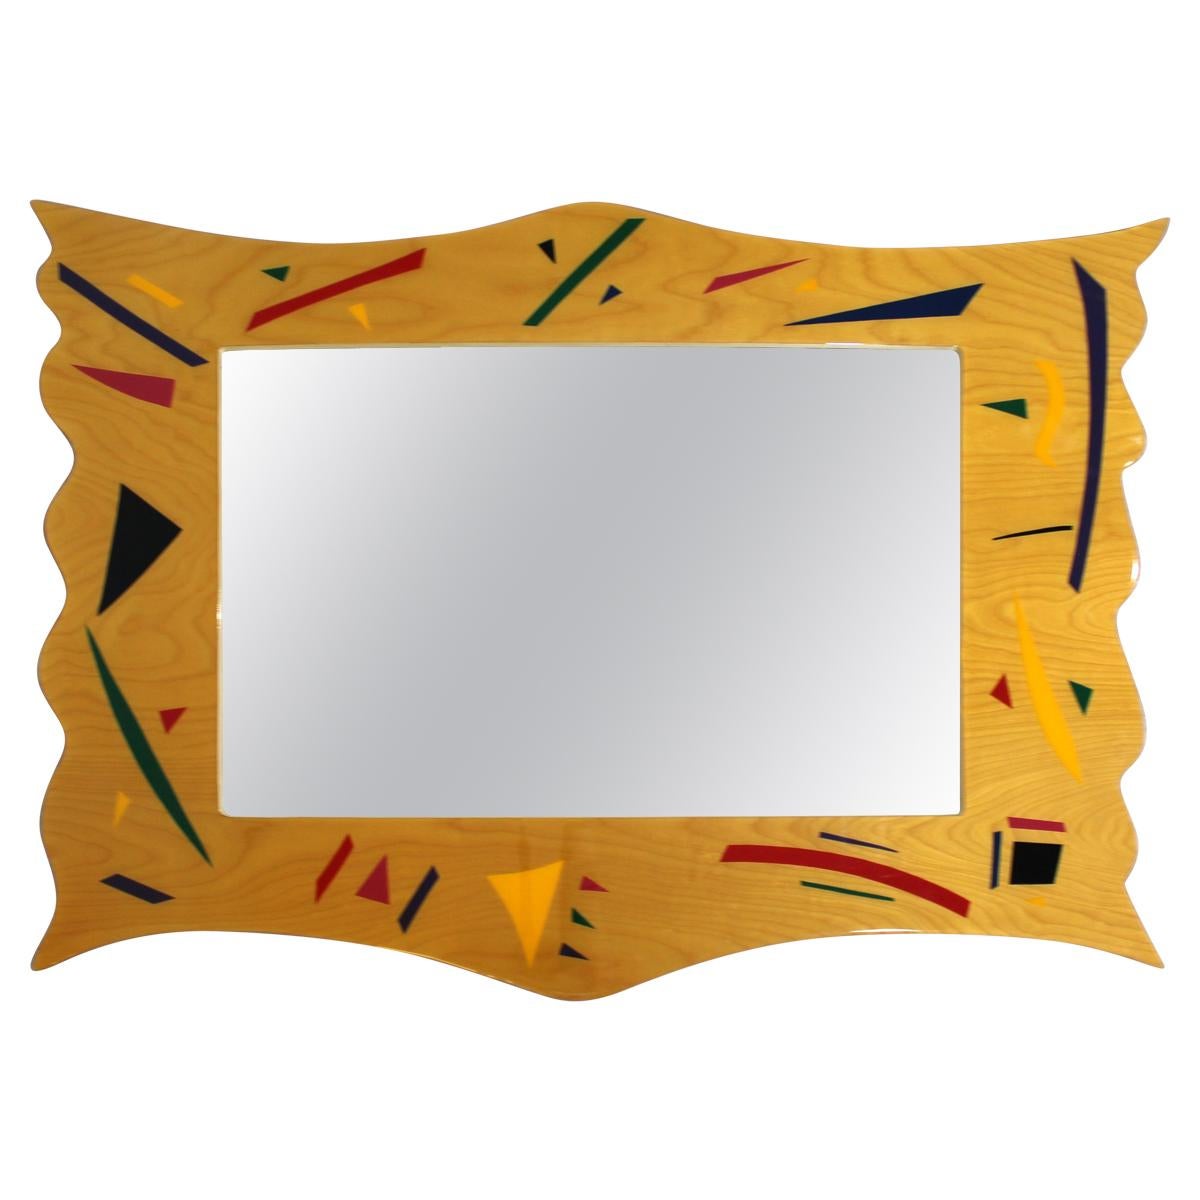 Contemporary Modern Memphis Large Rectangular Lacquered Hanging Wall Mirror